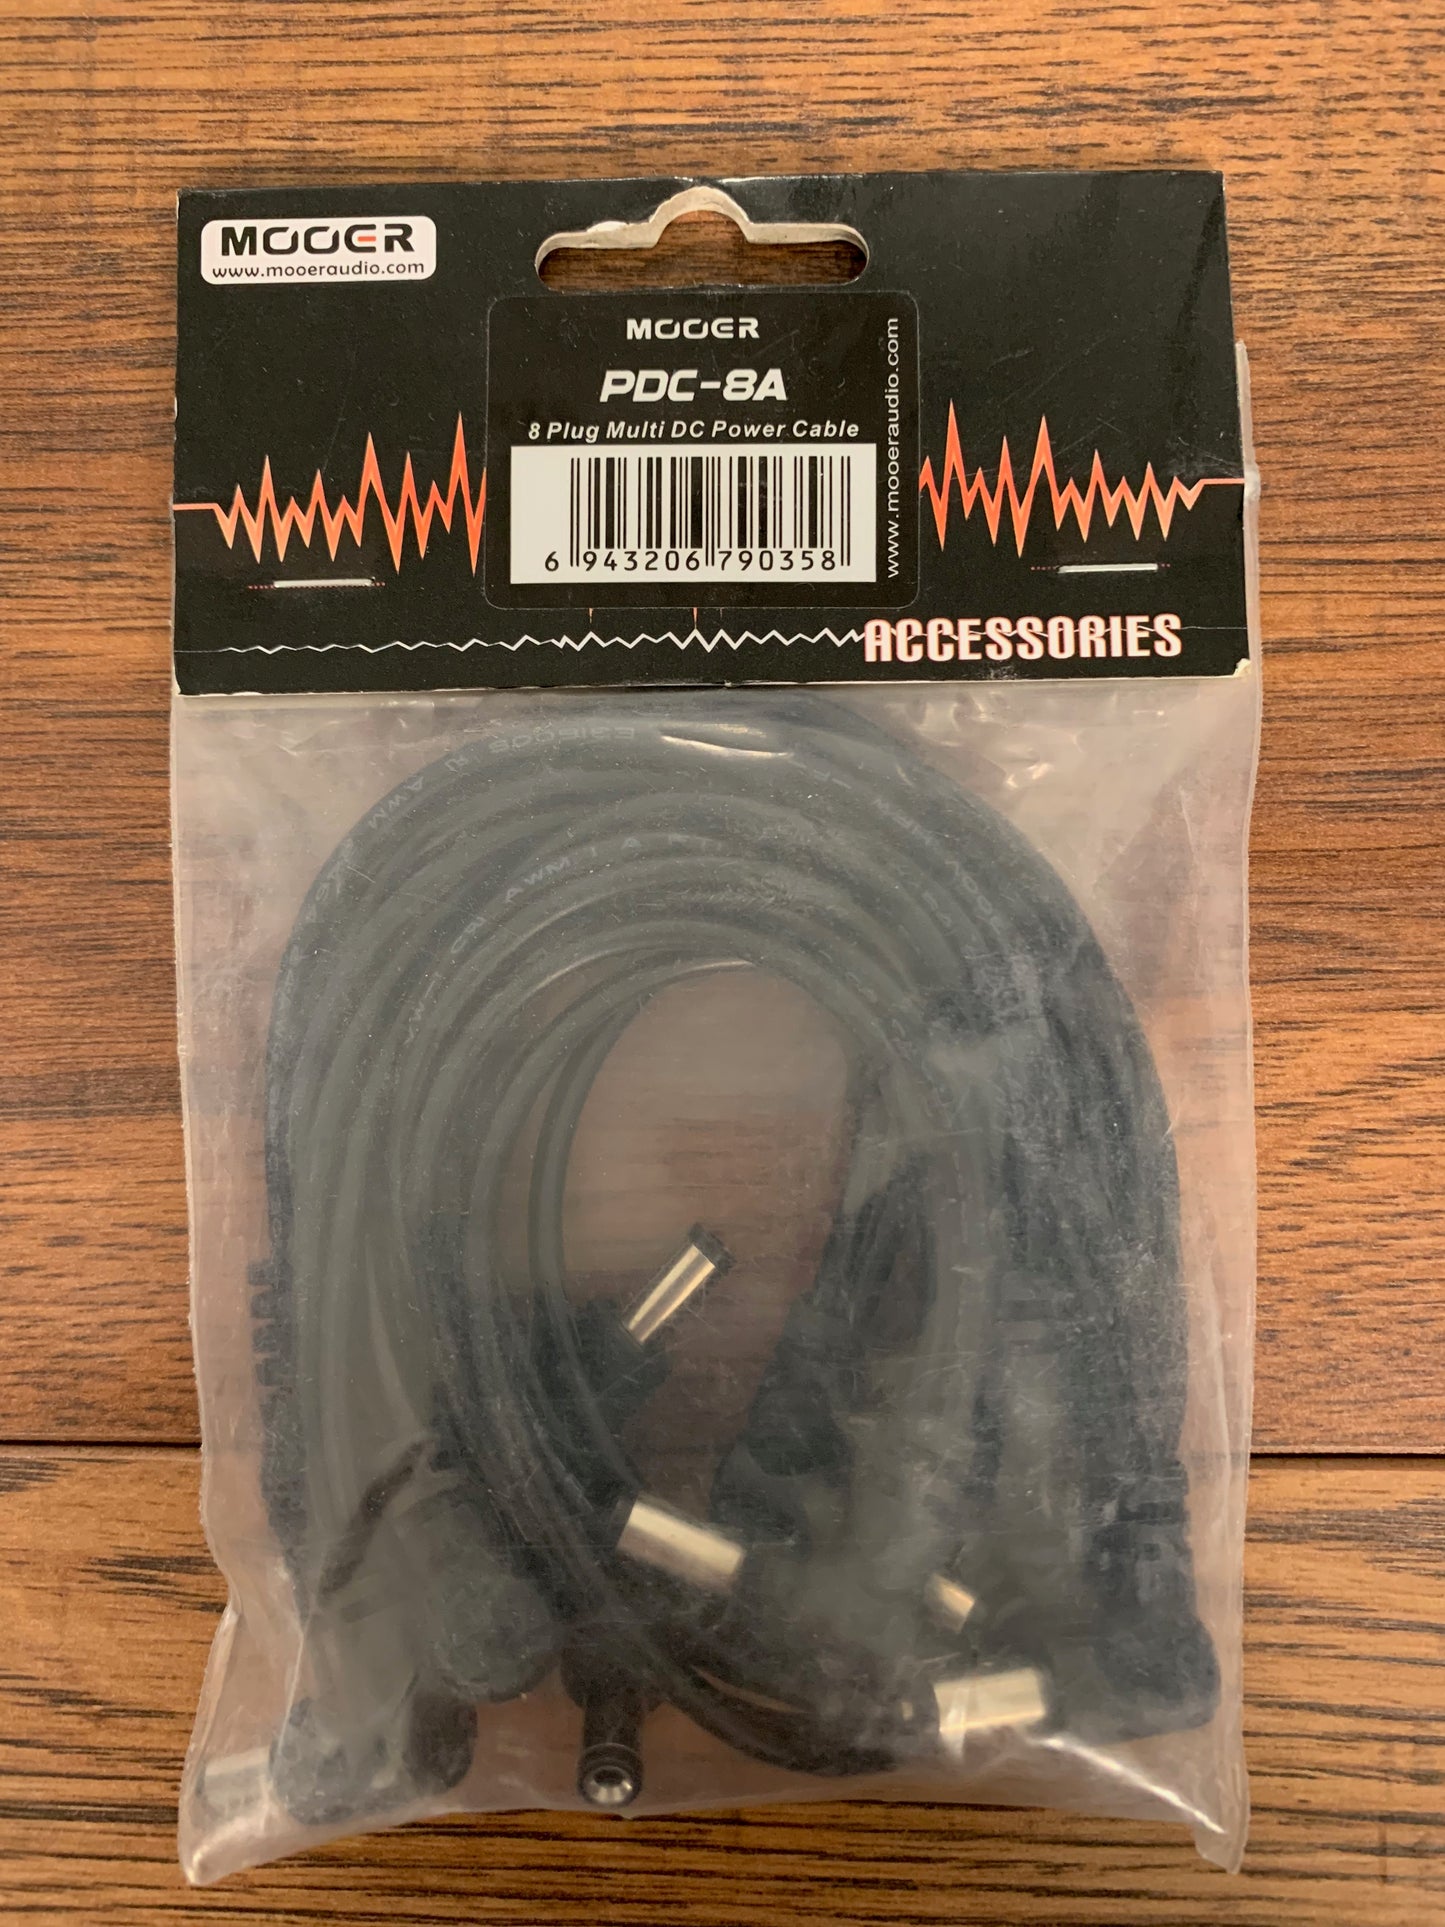 Mooer Audio PDC-8A 8 Angled Connector Daisy Chain Effect Pedal Power Cable